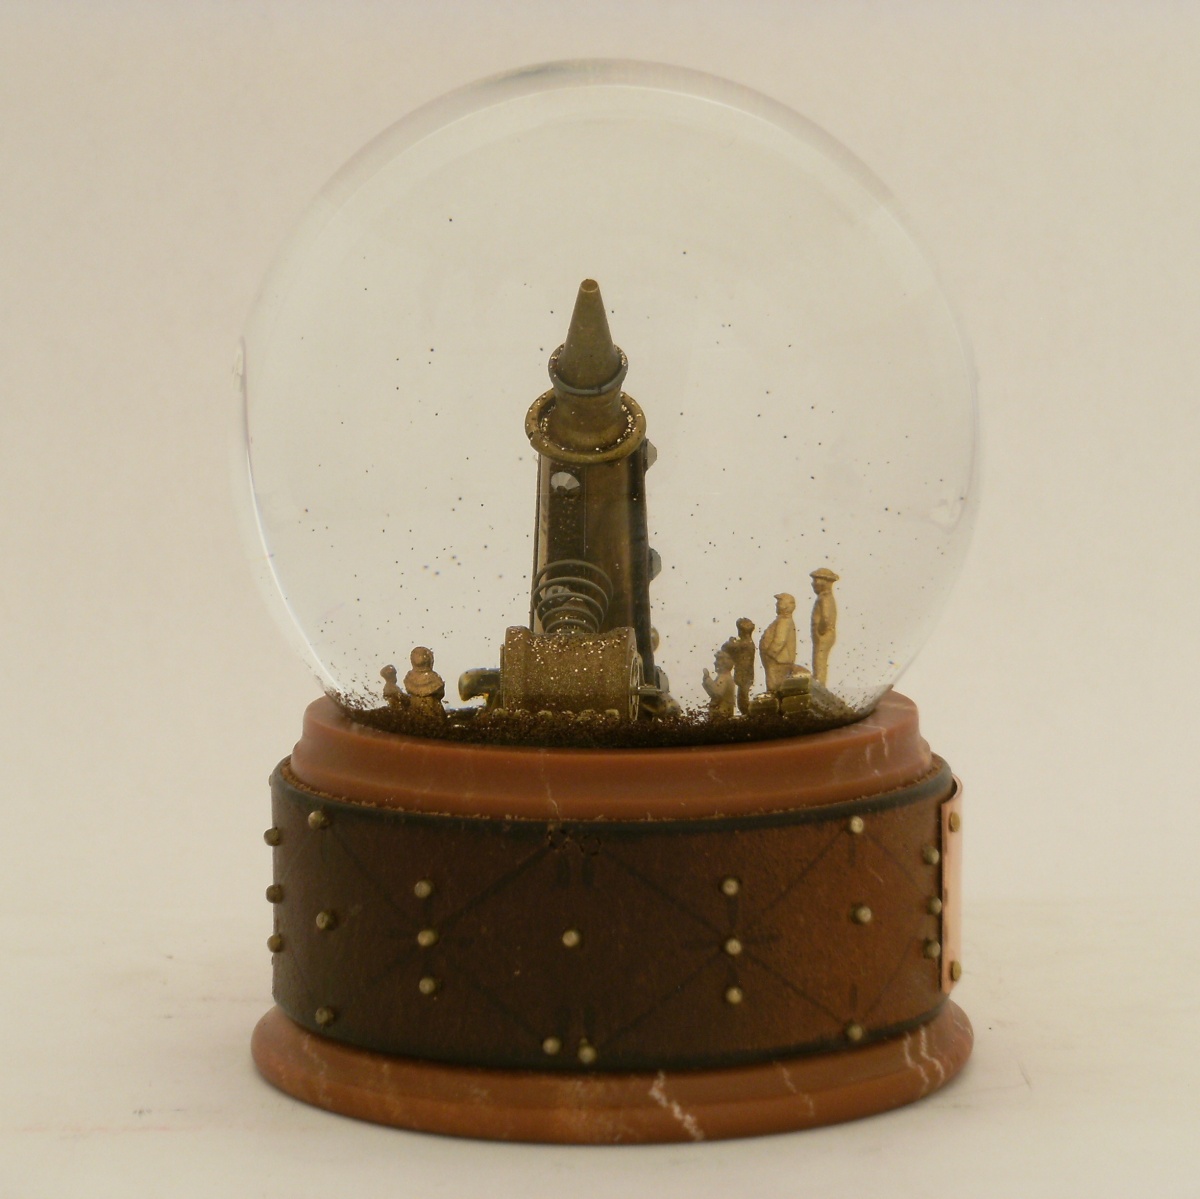 Launch Party snow globe, Camryn Forrest Designs 2013